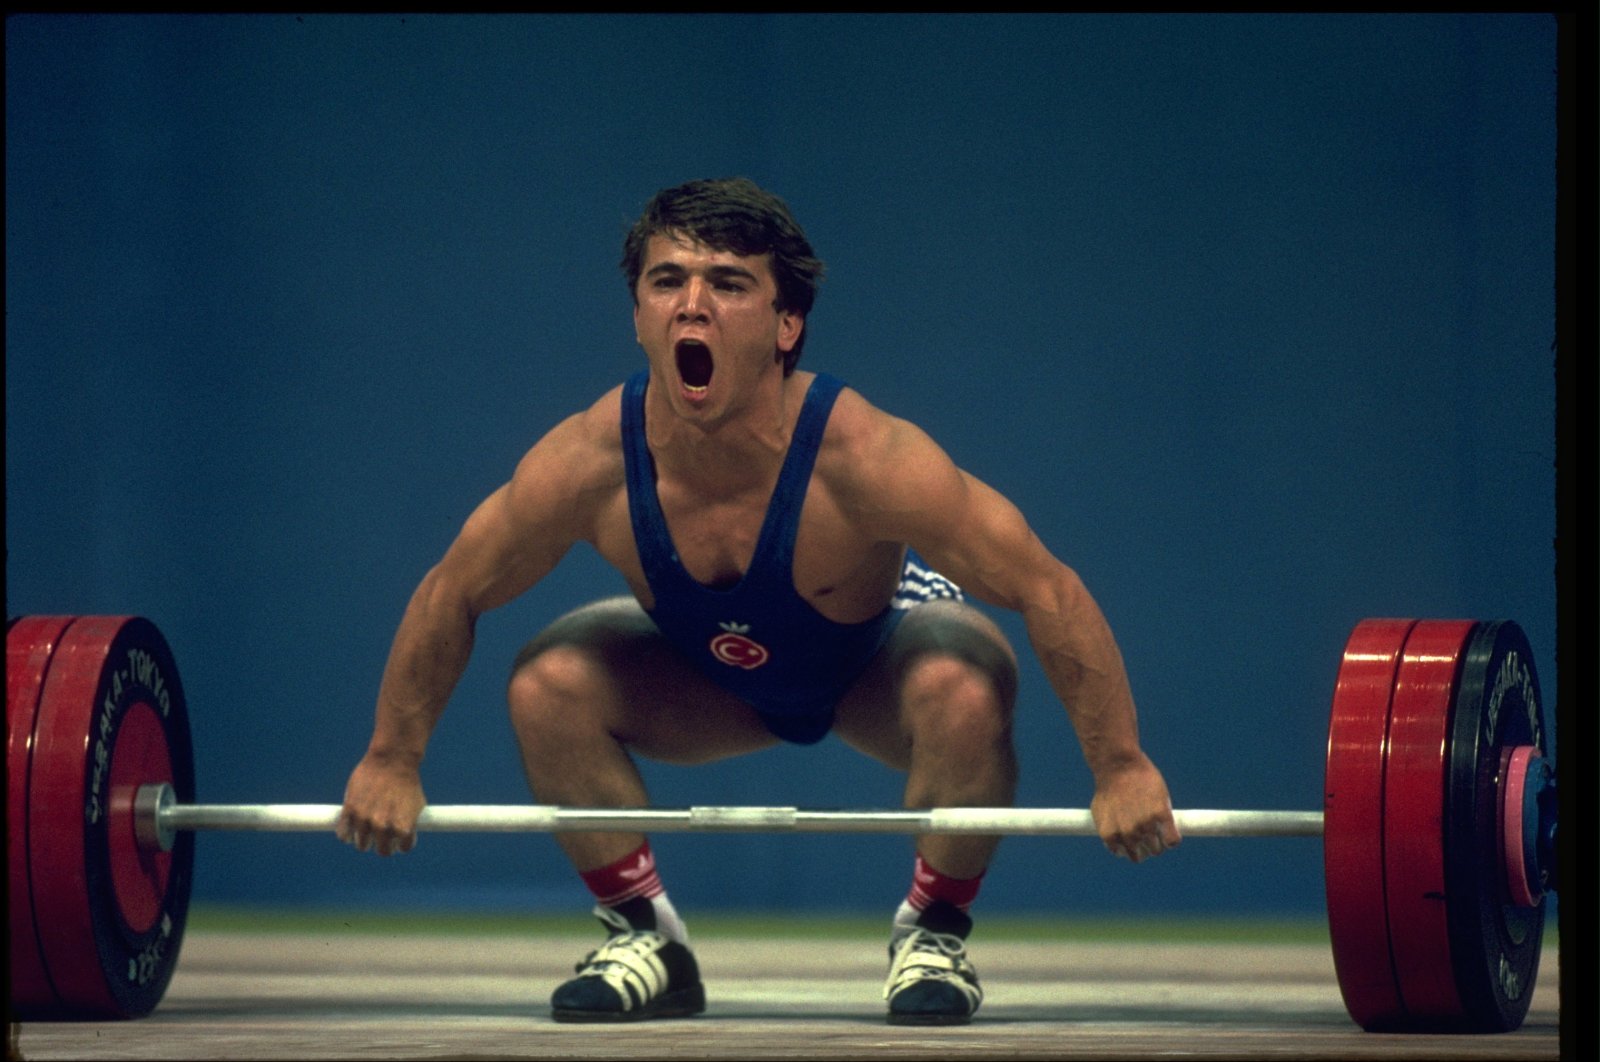 Türkiye&#039;s Naim Süleymanoğlu lifts weights during the featherweight 60 kg. snatch competition at the 1988 Seoul Summer Olympics, Seoul, South Korea, Sept. 20, 1988. (Getty Images Photo)